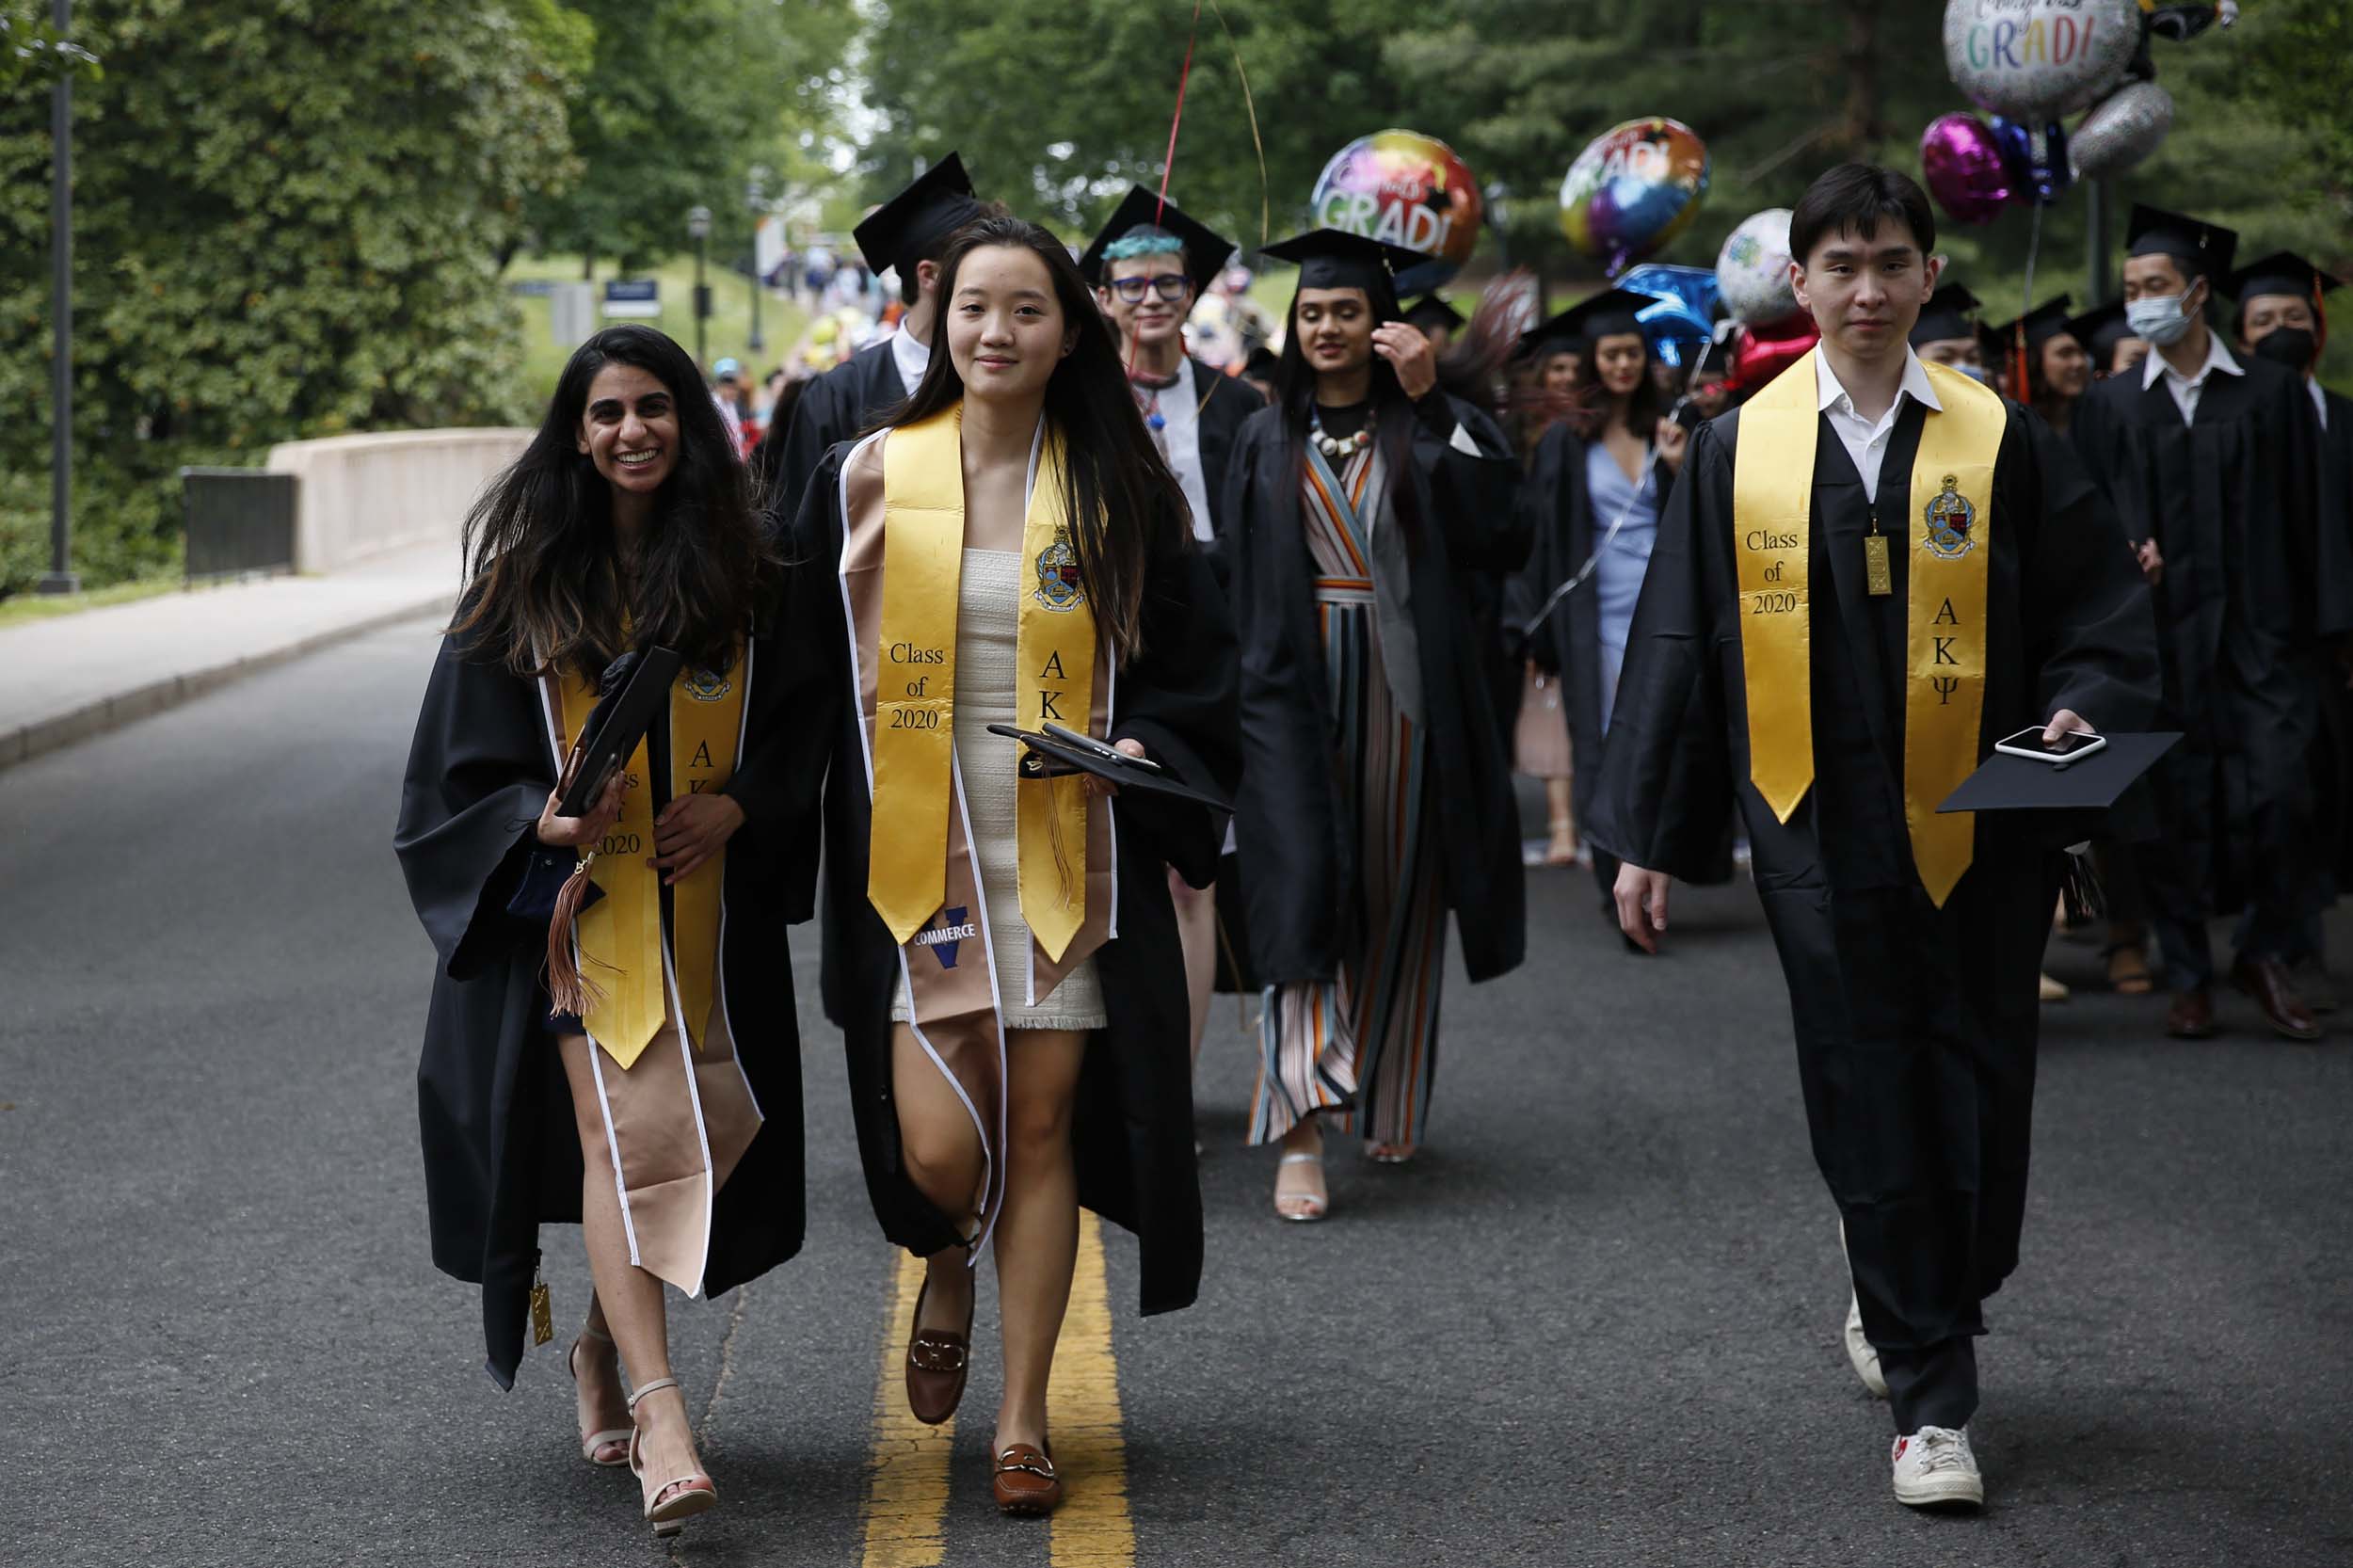 UVA graduations walk in their robes down the road carrying balloons